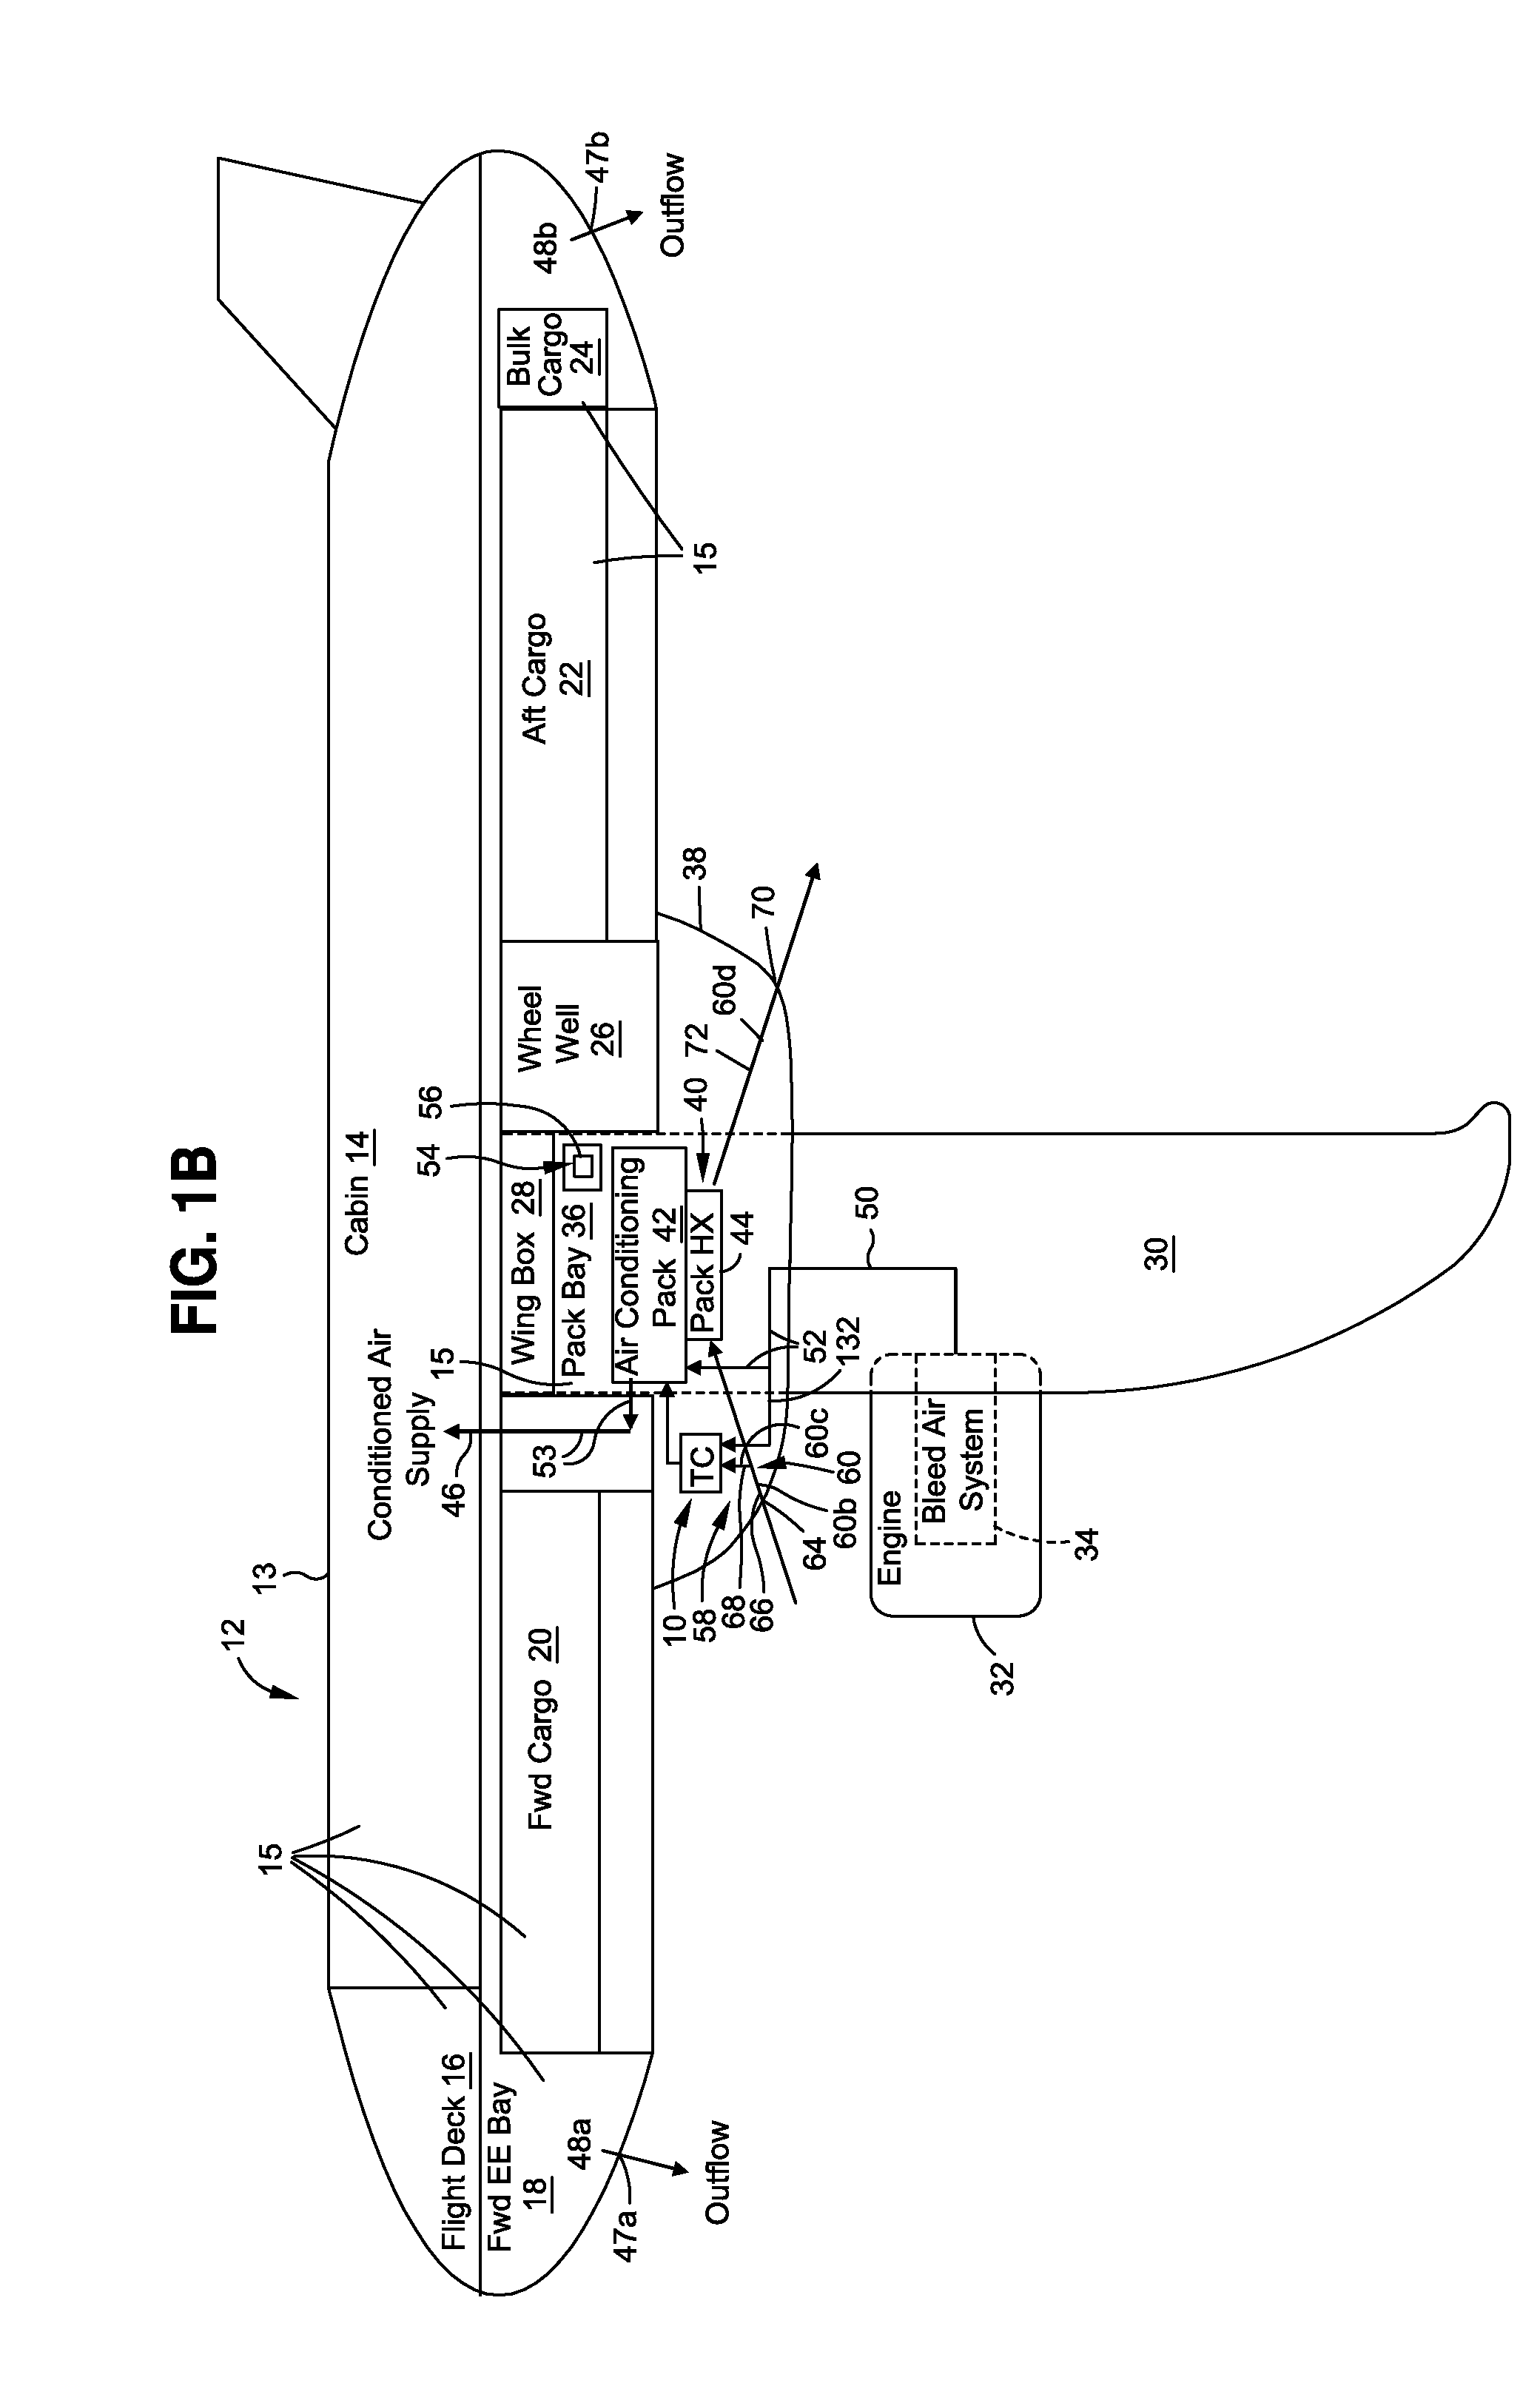 Turbo-Compressor System and Method for Extracting Energy from an Aircraft Engine